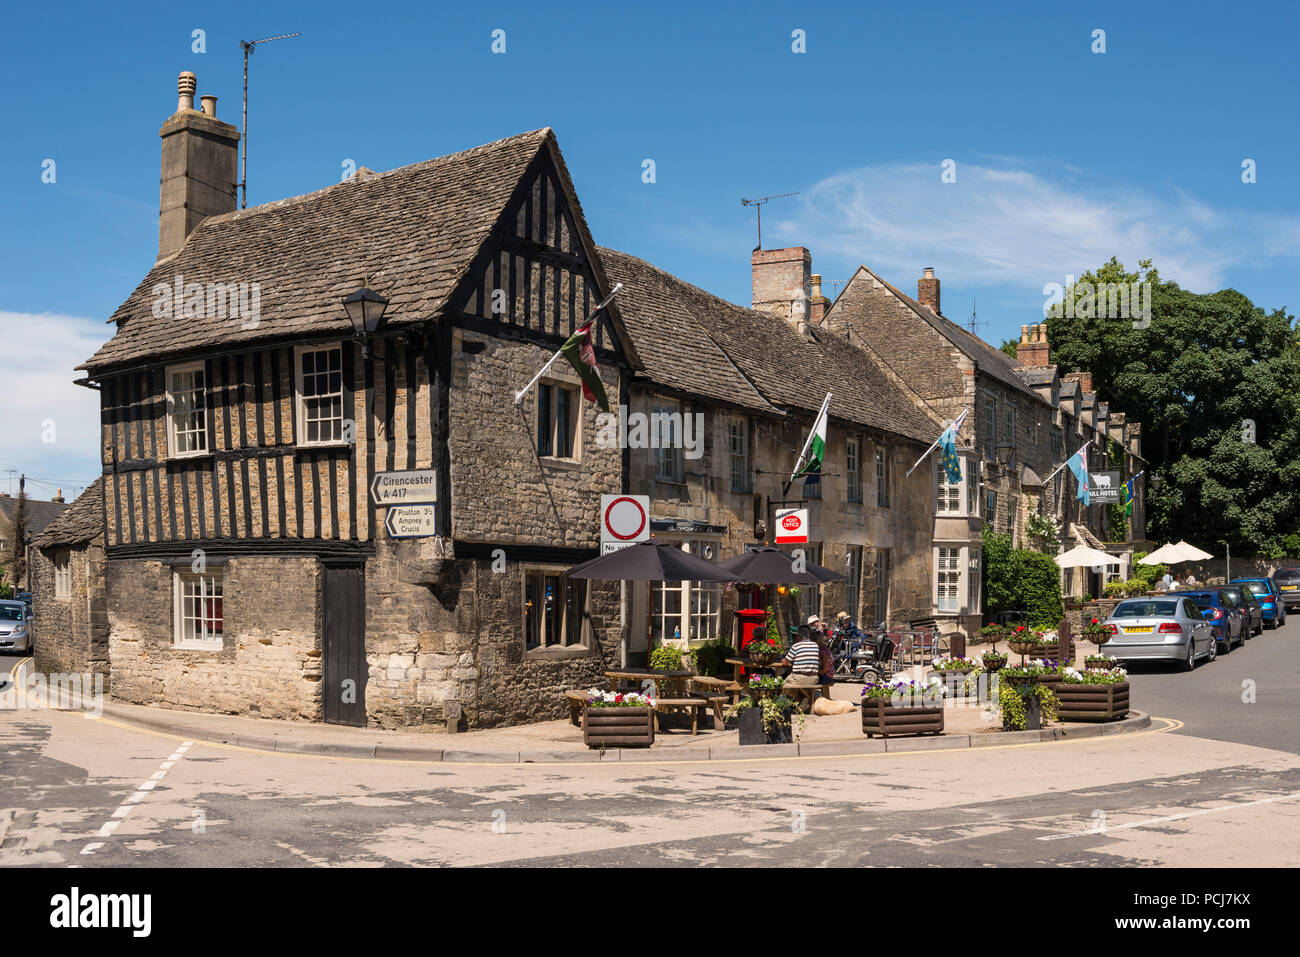 People sitting outside of Old Cotswold stone buildings in Market Place, Fairford, Gloucestershire, UK Stock Photo